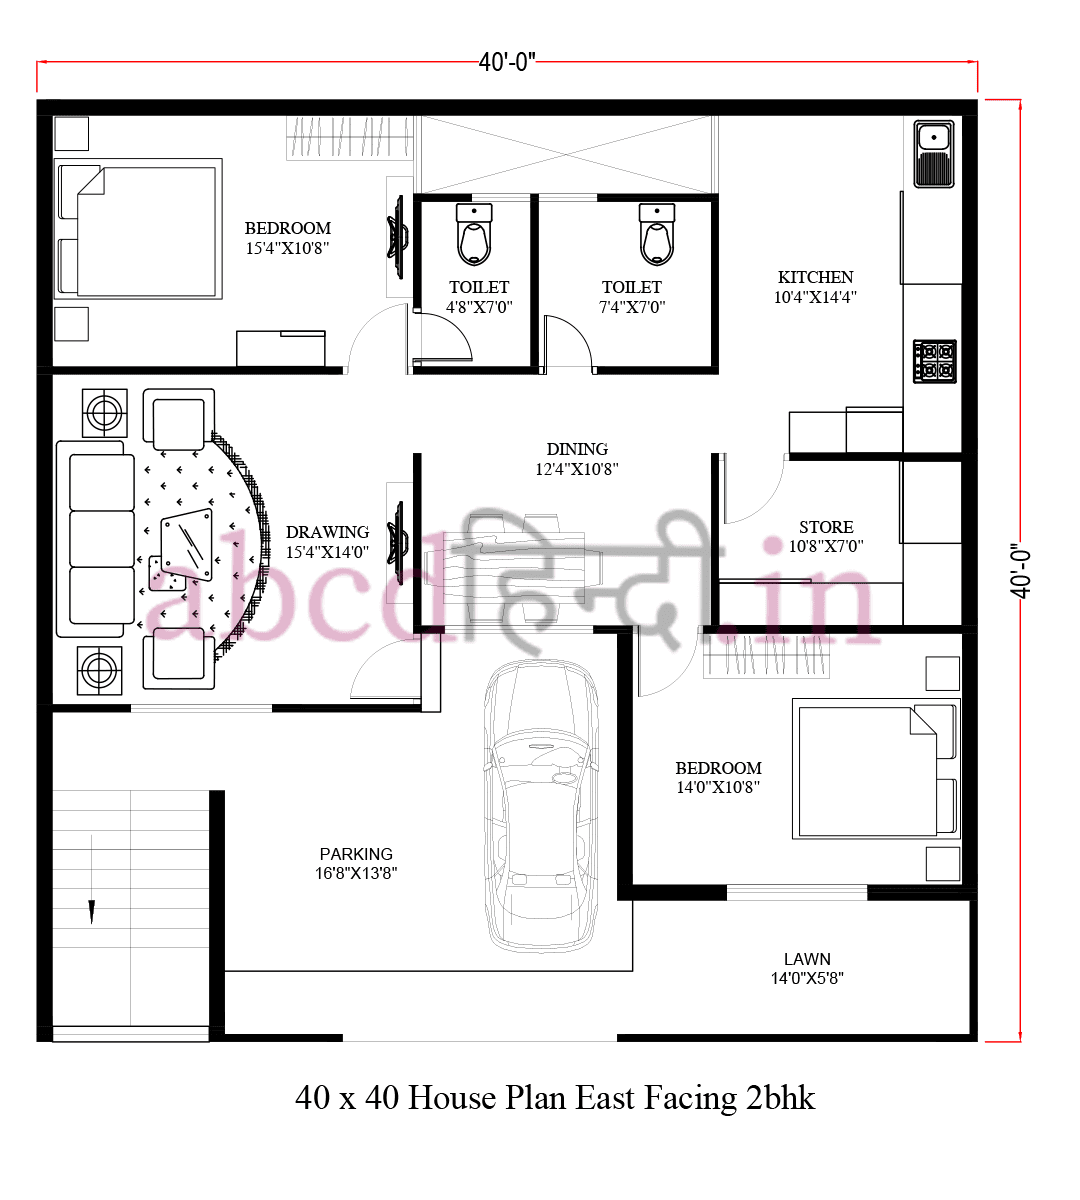 40 x 40 house plans east facing